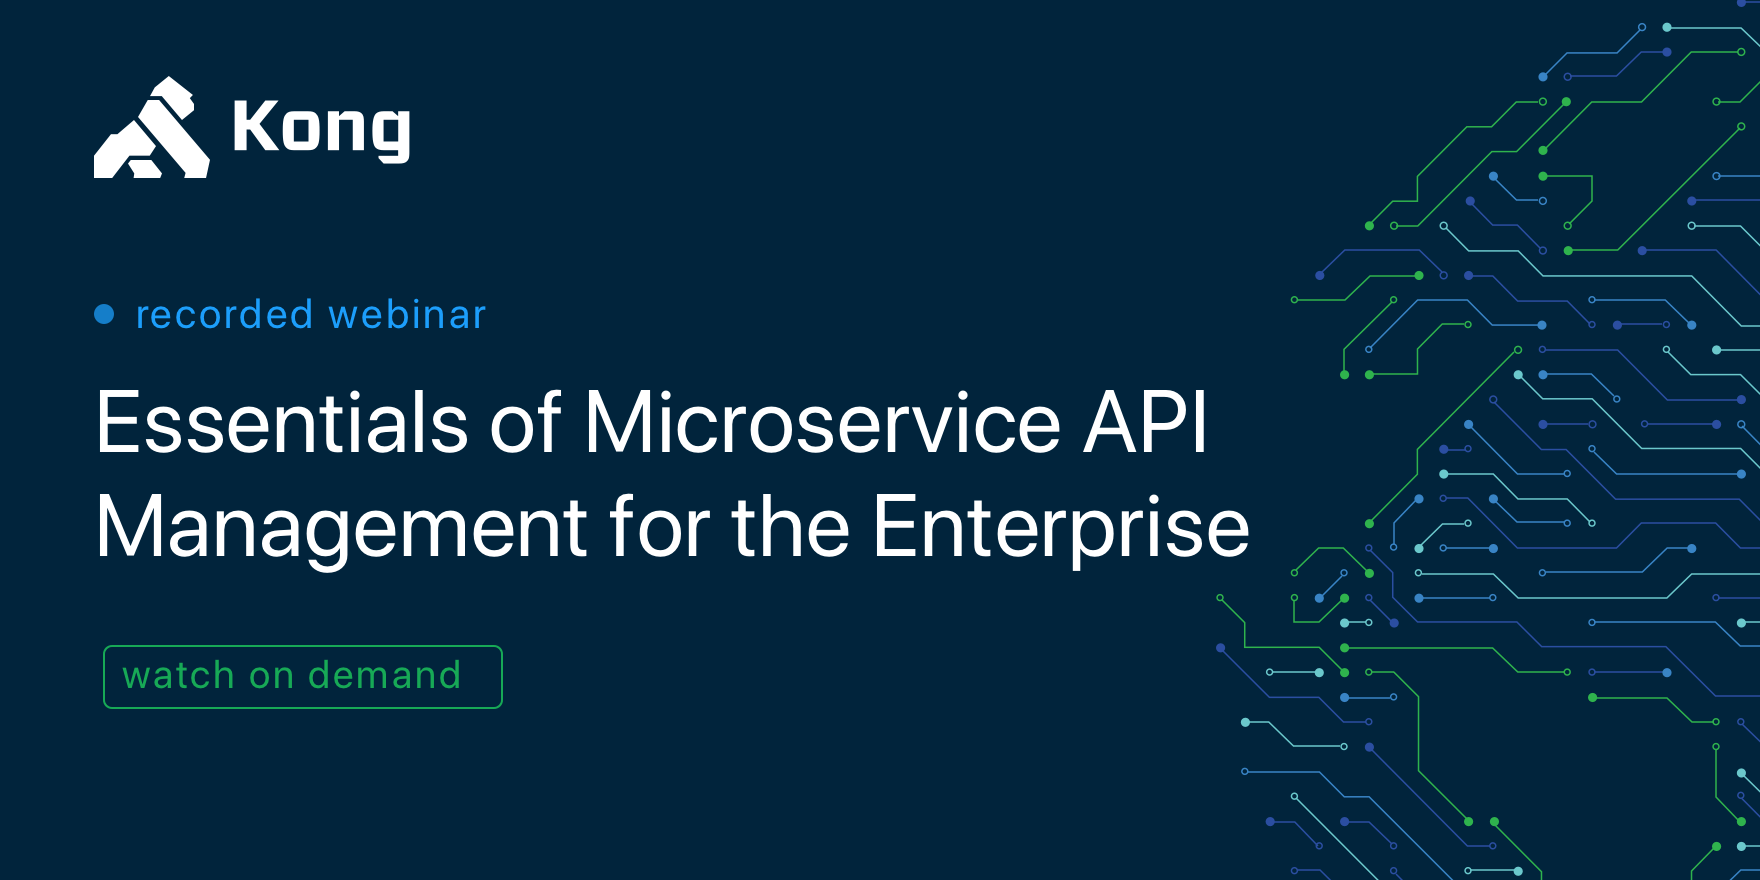 Essentials of Microservices API Management for the Enterprise